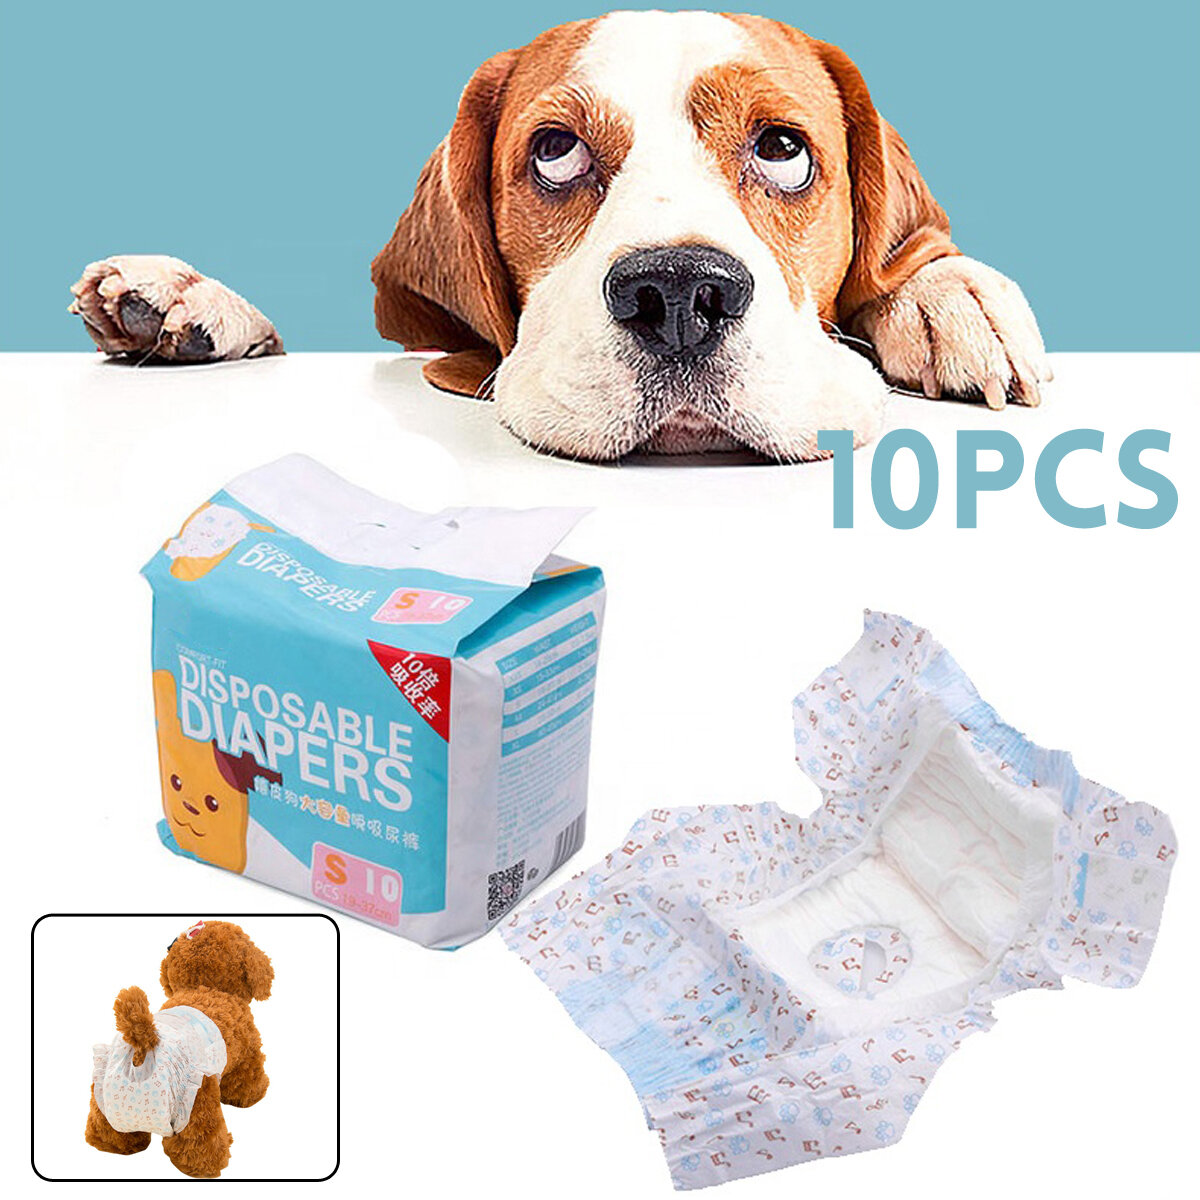 10Pcs Disposable Baby Pet Diapers Ultra Protection Breathable Sanitary Nappy Pants